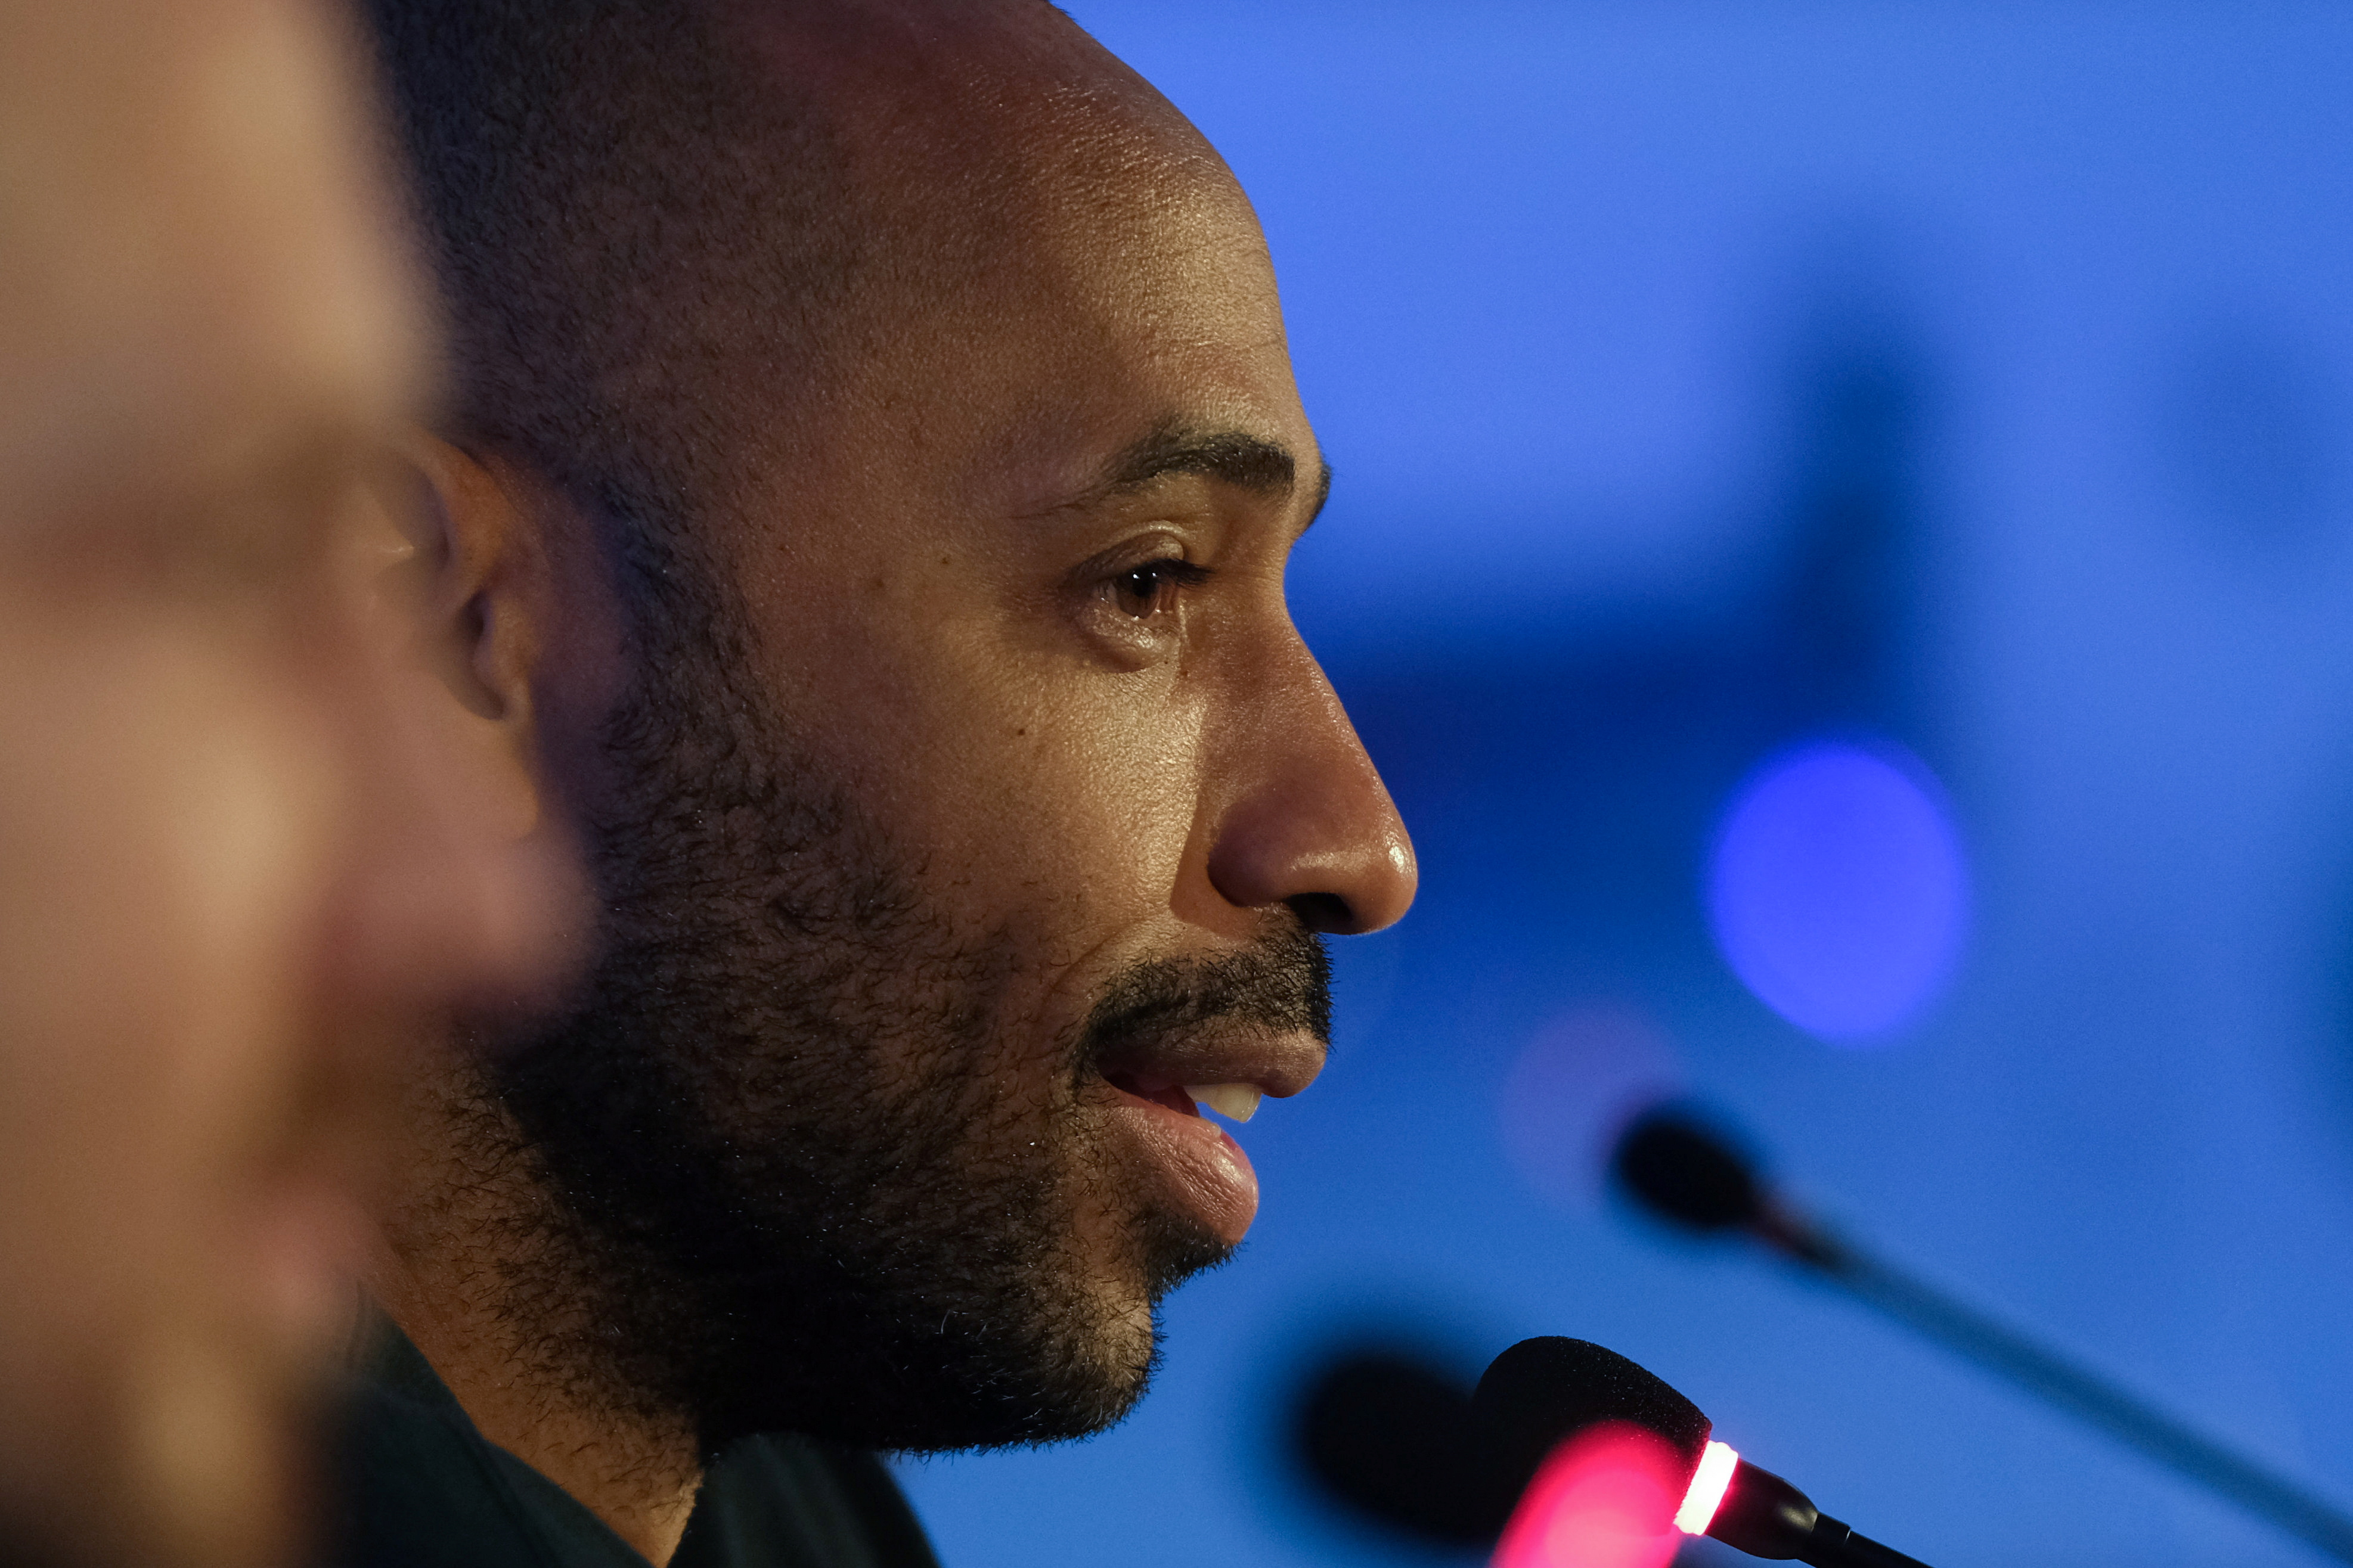 Assistant coach of the Belgium national soccer team Thierry Henry speaks at a news conference during the Web Summit, Europe's largest technology conference, in Lisbon, Portugal, November 2, 2021. REUTERS/Pedro Nunes